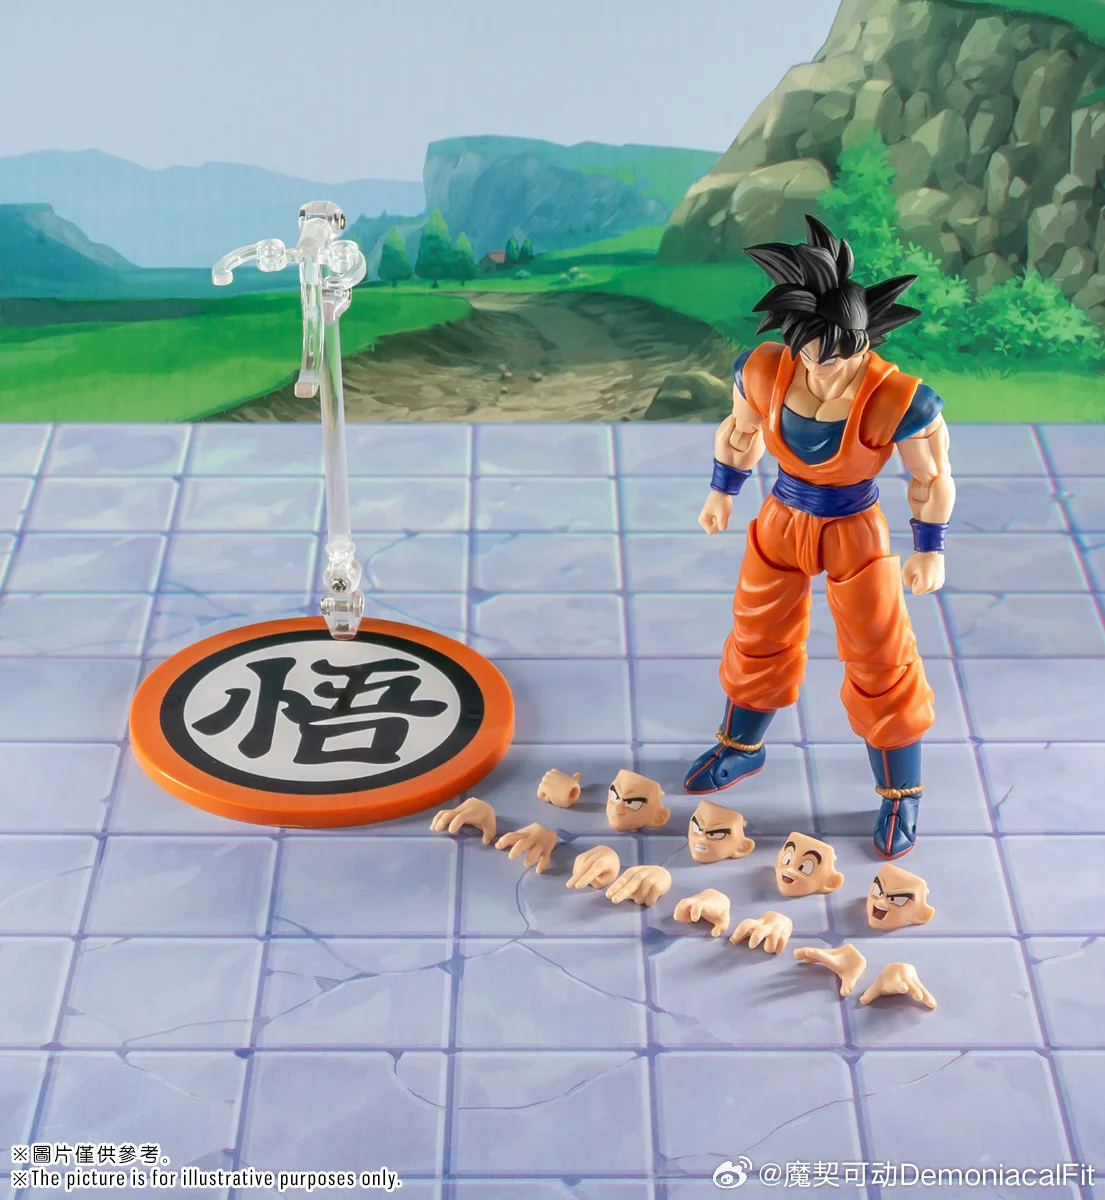 In stock demoniacal fit df dragon ball sh figuarts shf martialist forever goku 3 0 new thumb200